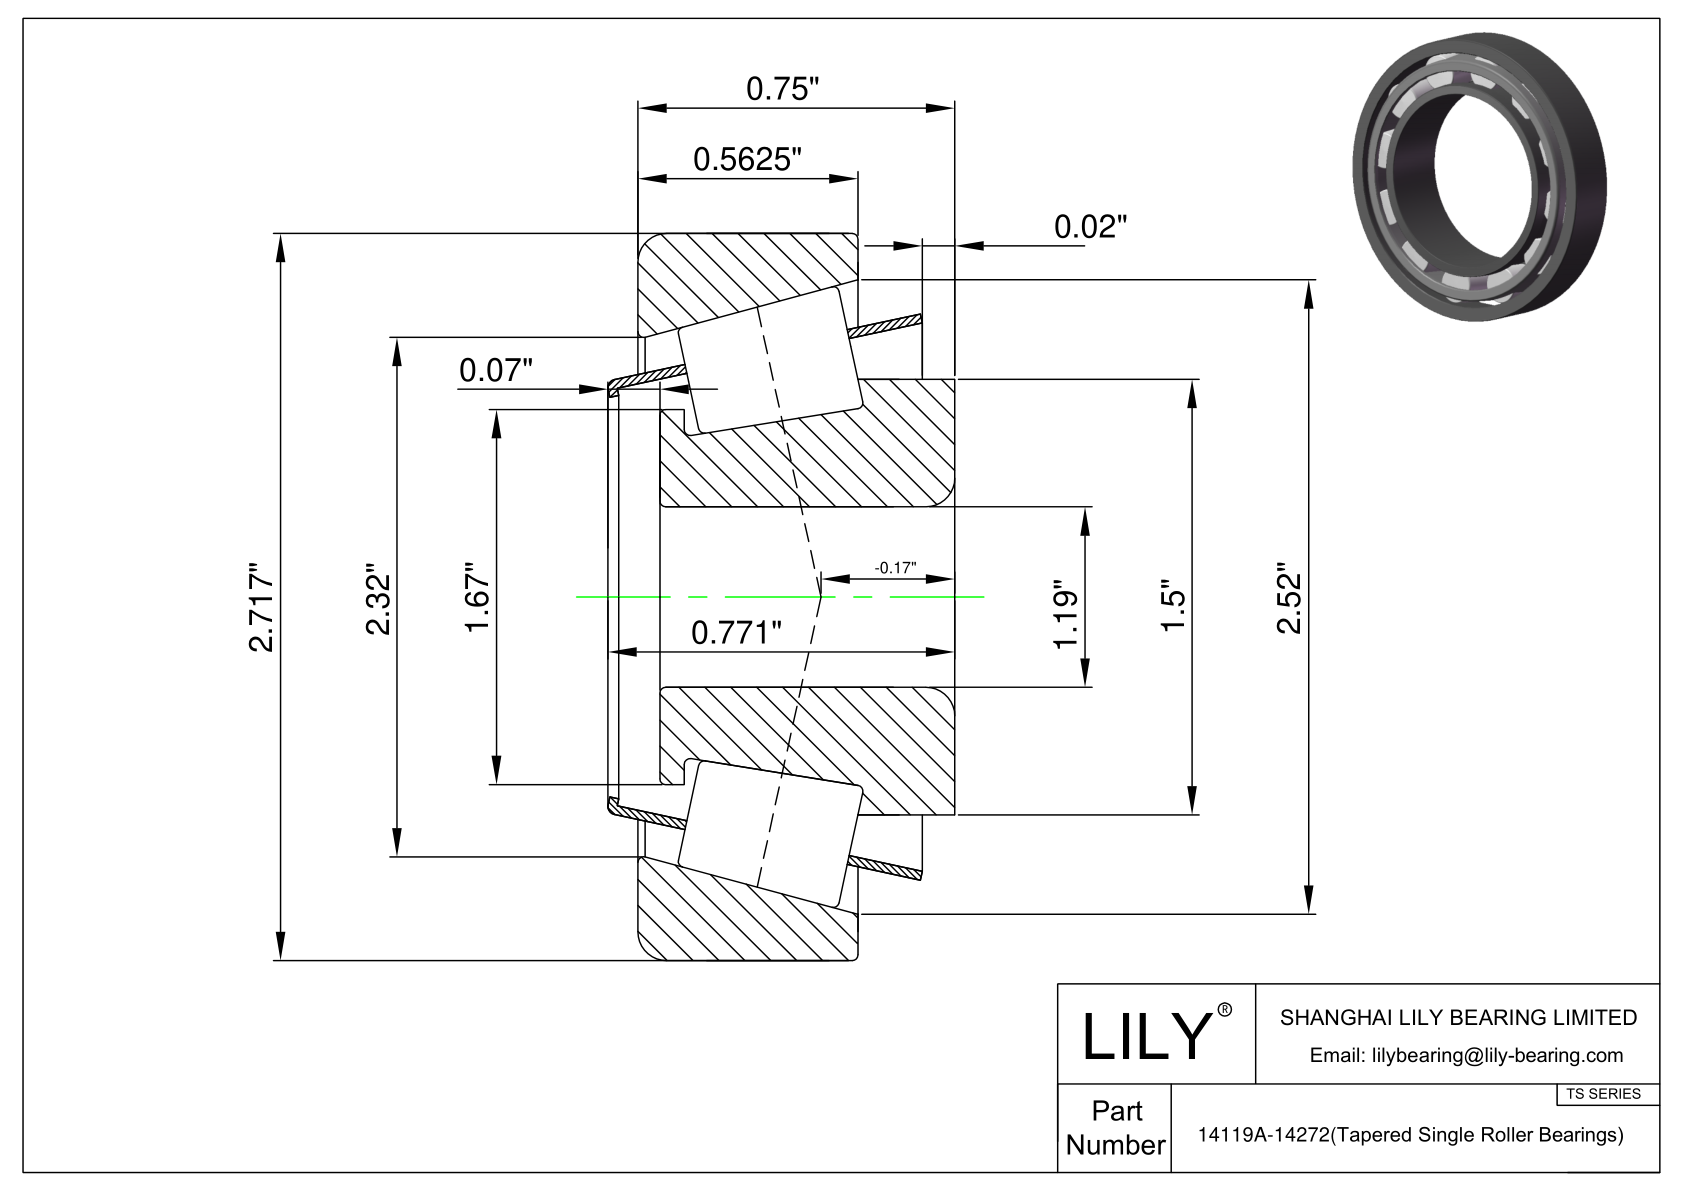 14119A-14272 TS (Tapered Single Roller Bearings) (Imperial) cad drawing